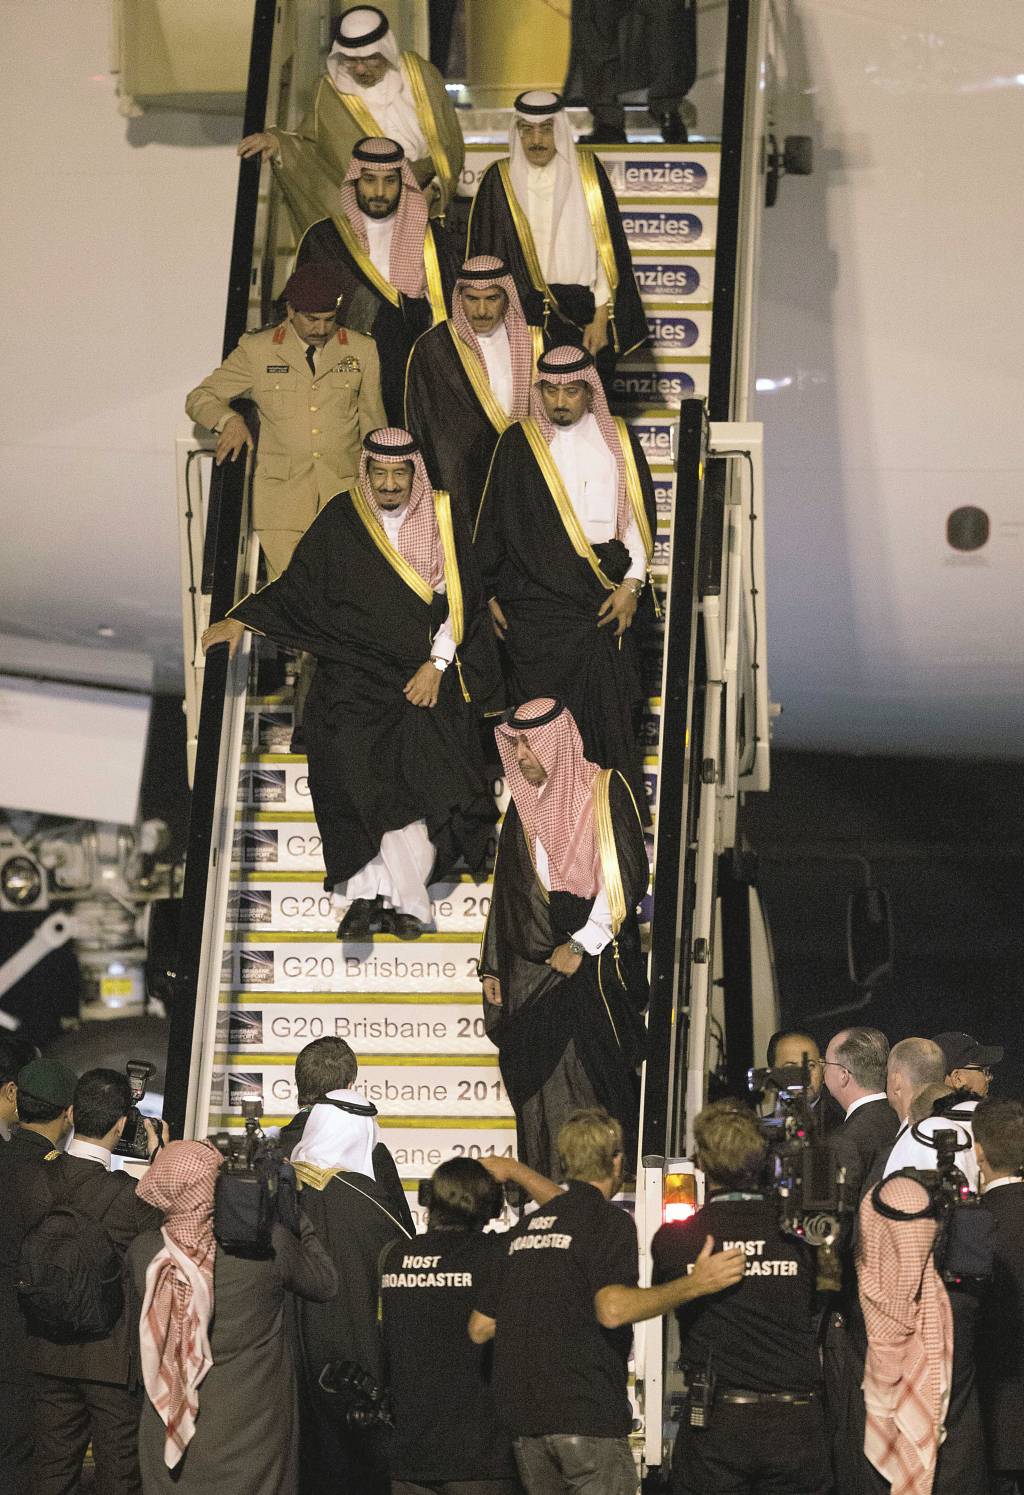 BRISBANE, AUSTRALIA - NOVEMBER 13:  In this handout photo provided by the G20 Australia, Crown Prince Salman bin Abdulaziz Al Saud of Saudi Arabia arrives at the G20 Terminal on November 13, 2014 in Brisbane, Australia. World leaders have gathered in Brisbane for the annual G20 Summit and are expected to discuss economic growth, free trade and climate change as well as pressing issues including the situation in Ukraine and the Ebola crisis. (Photo by Rob Maccoll/G20 Australia via Getty Images)